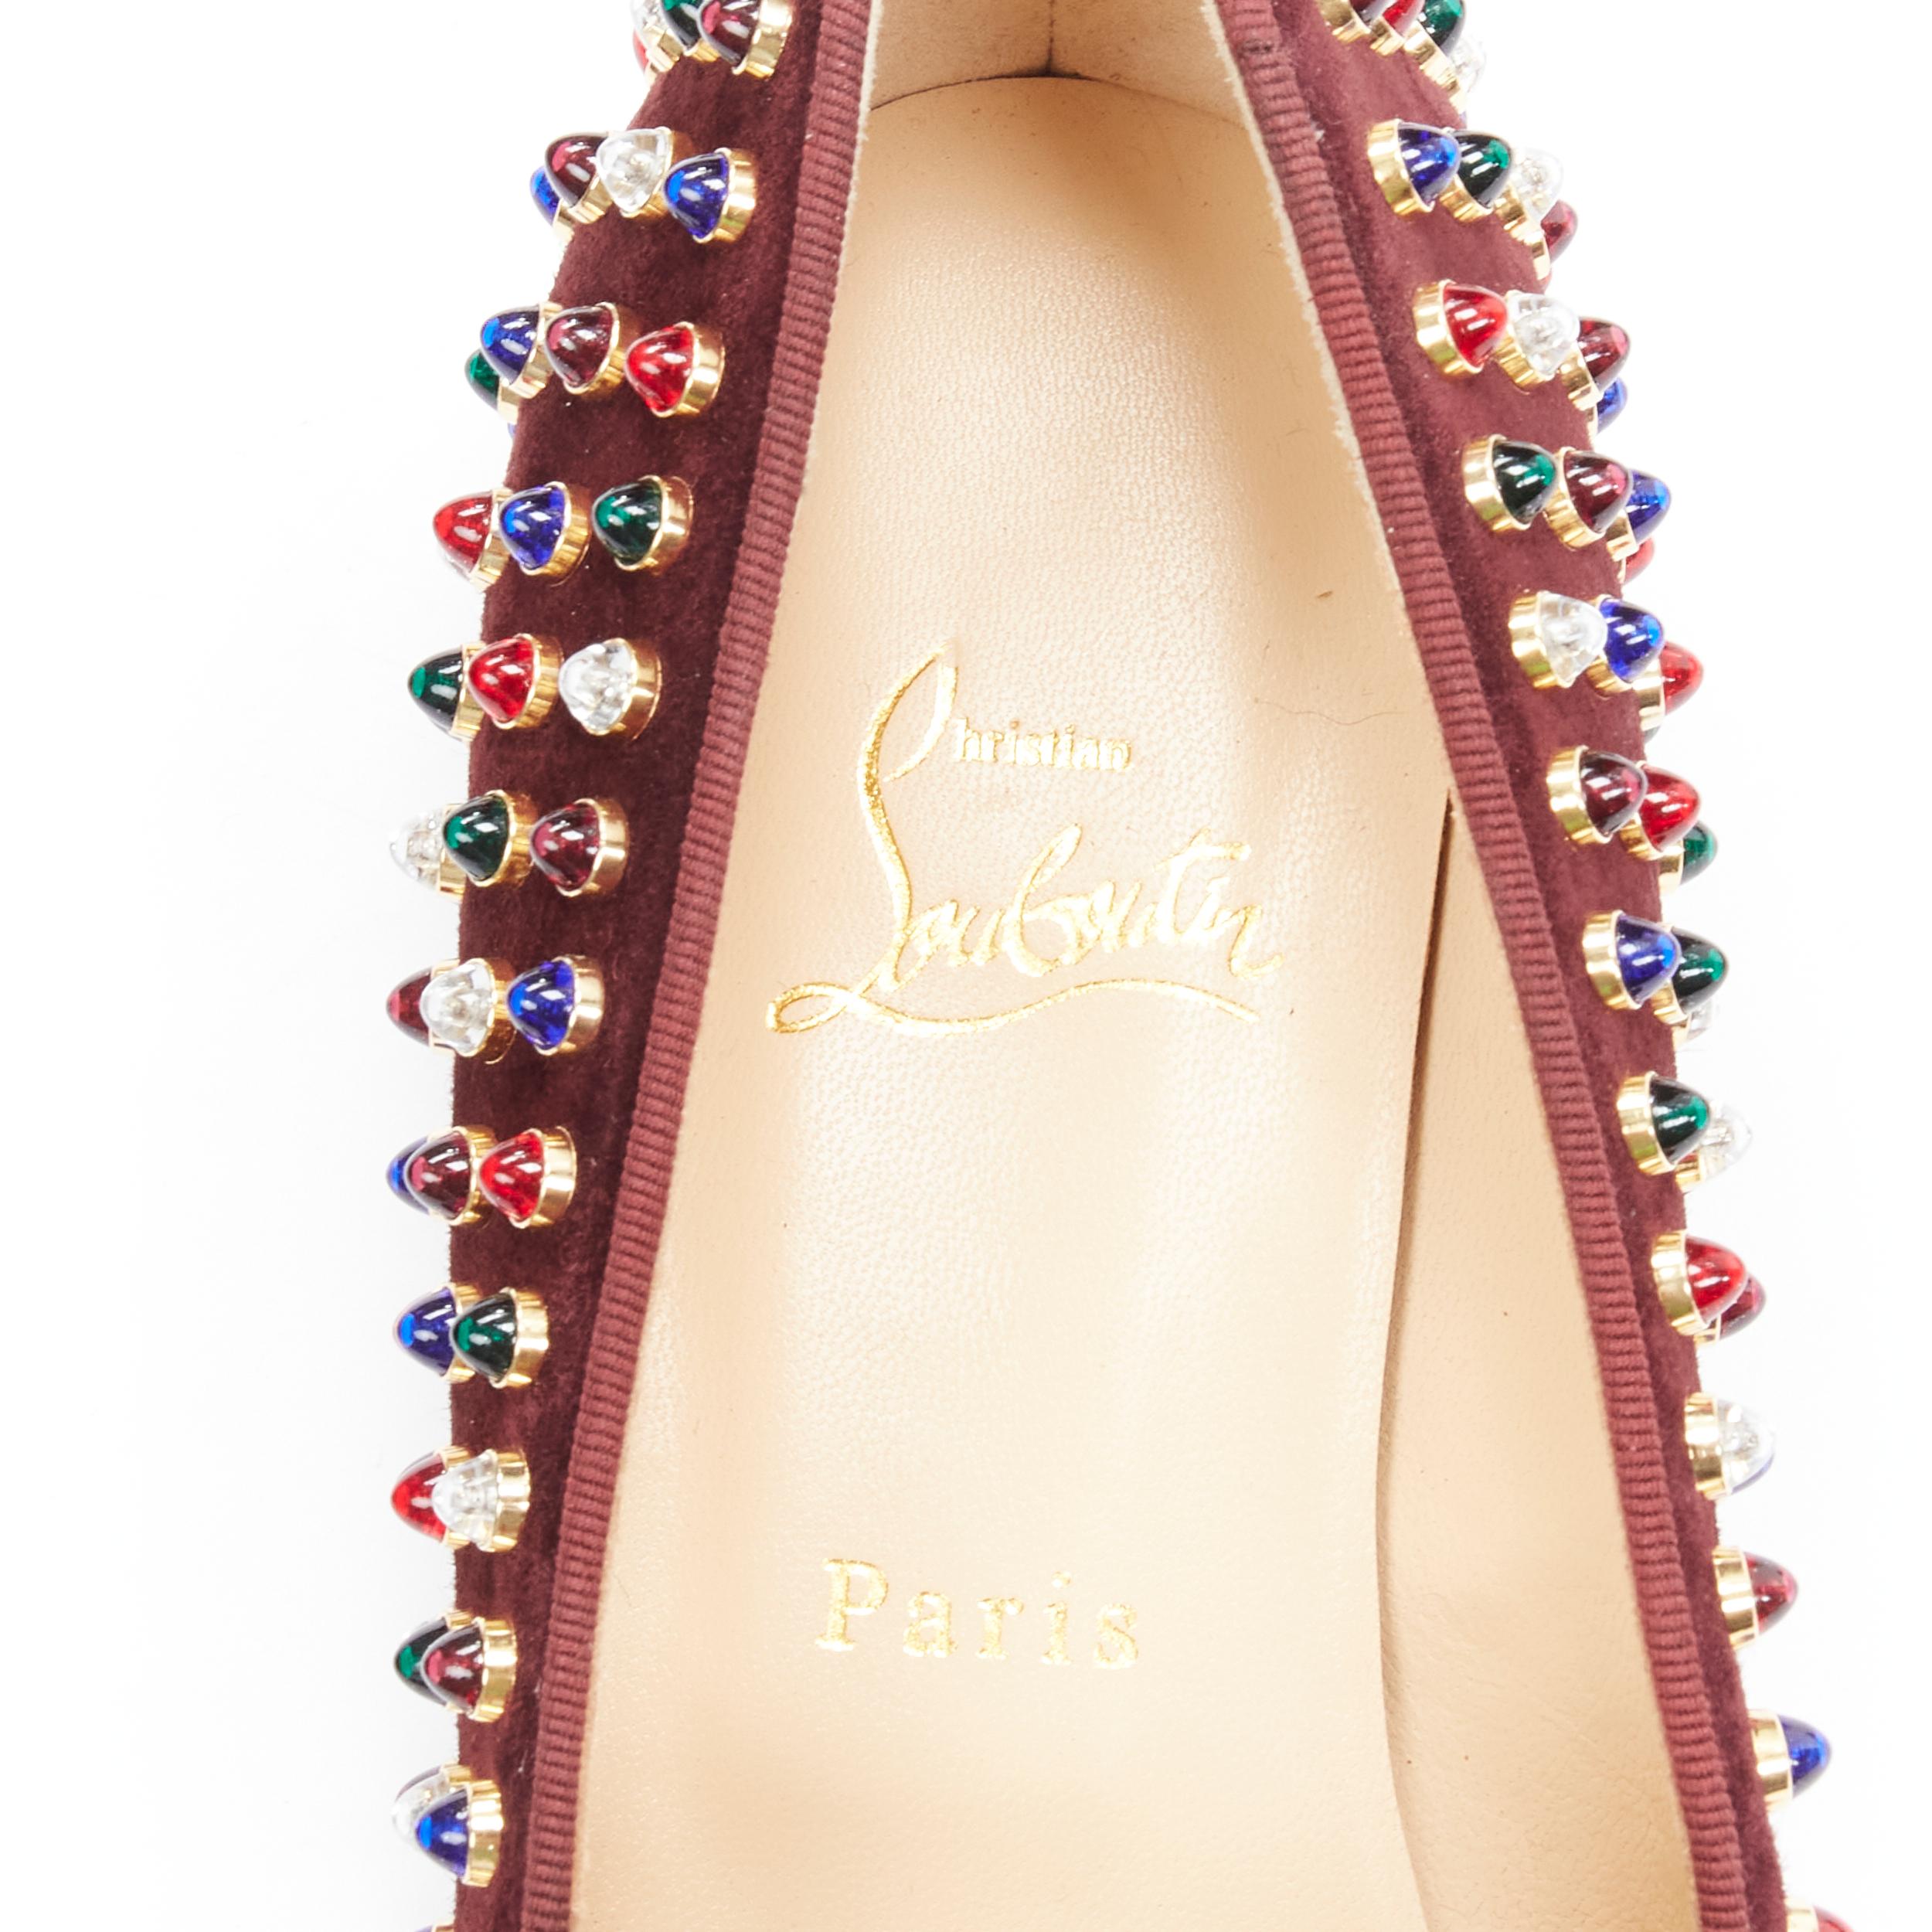 new CHRISTIAN LOUBOUTIN Jewel tone Gripoix stud burgundy red suede loafer EU39.5 For Sale 1